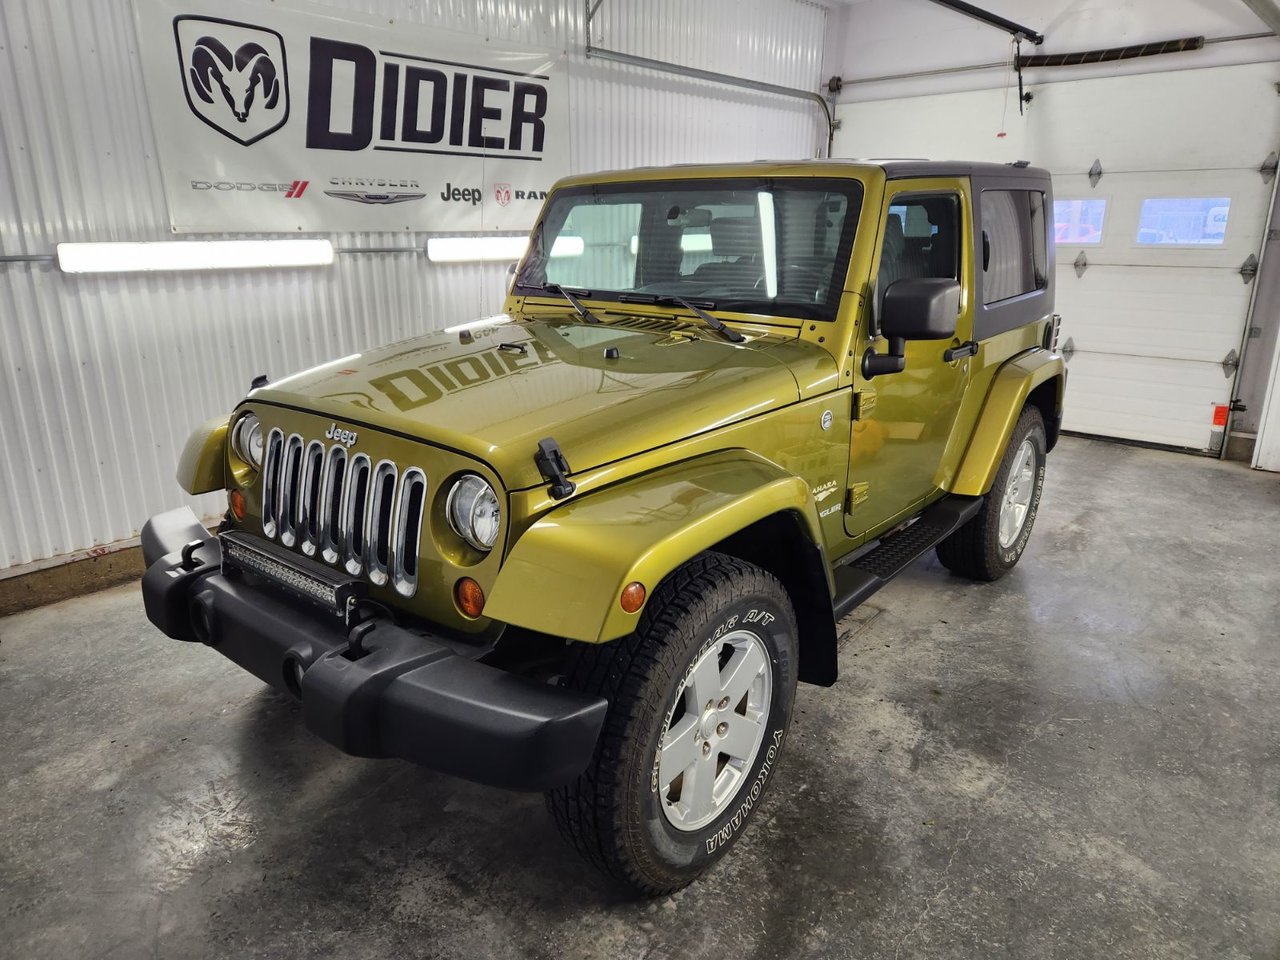 Used 2007 Jeep Wrangler with 131,955 km for sale at Otogo